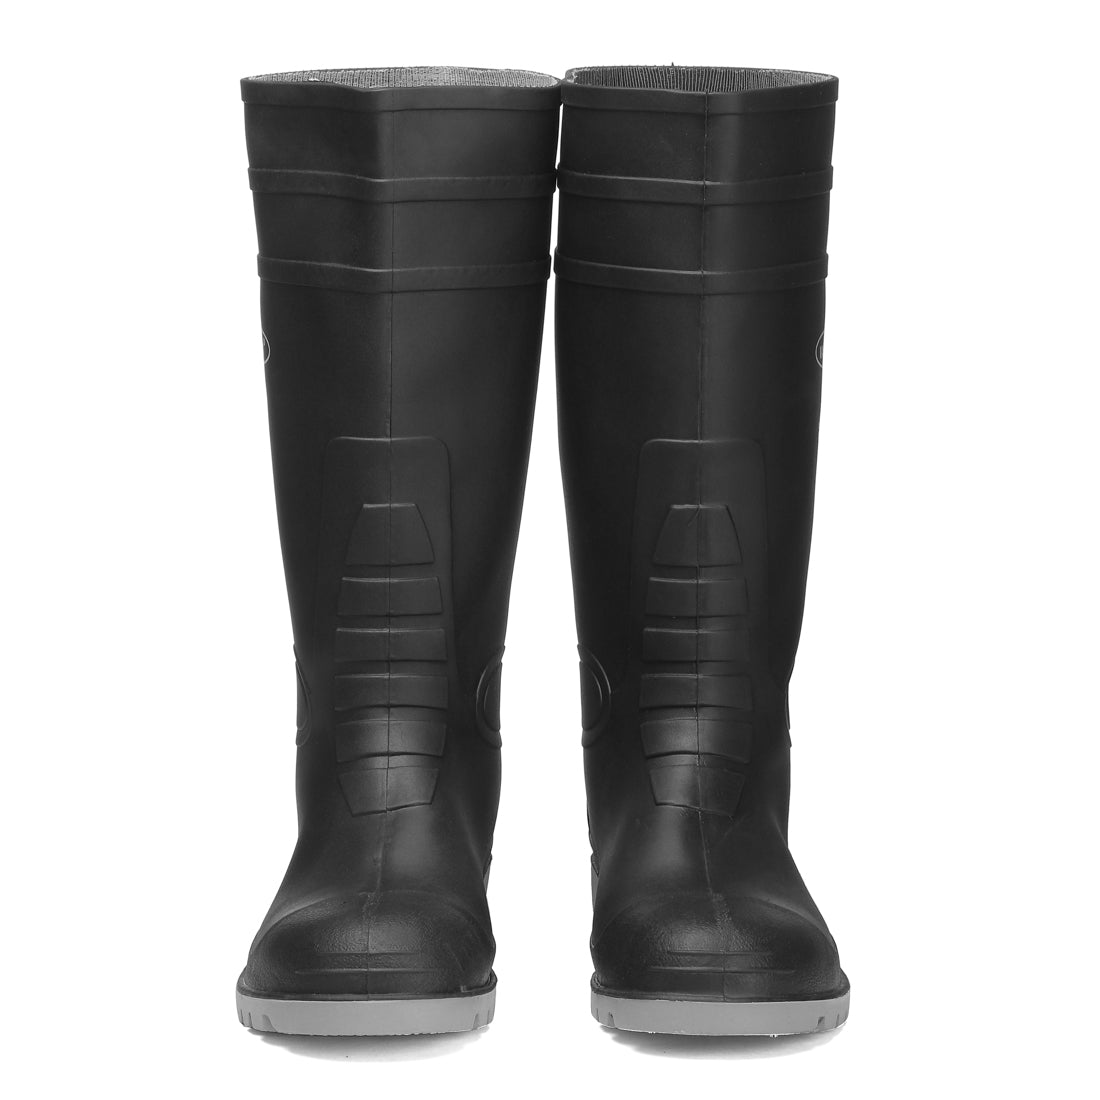 Vaultex Black PVC Super Safety Gum Boots with Steel Toe (ISI Marked)